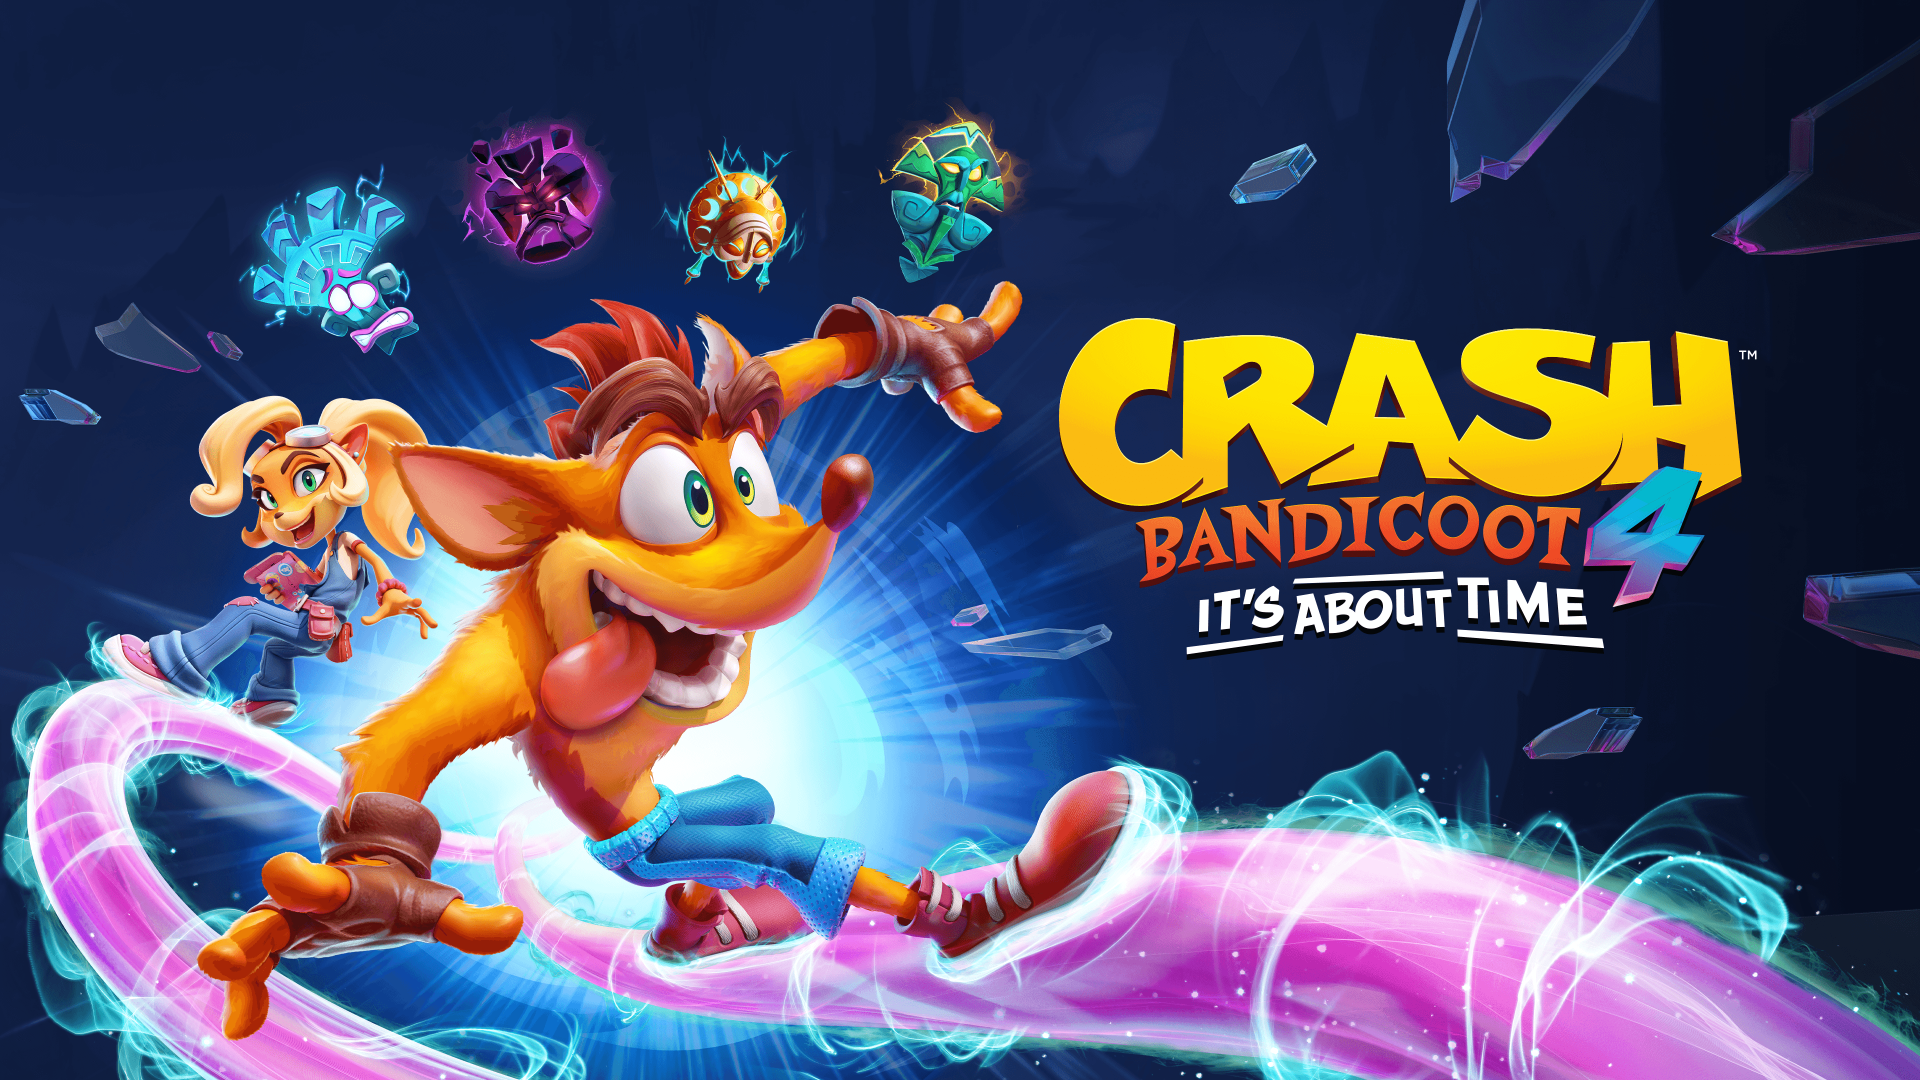 30 Crash Bandicoot 4 Its About Time HD Wallpapers and Backgrounds